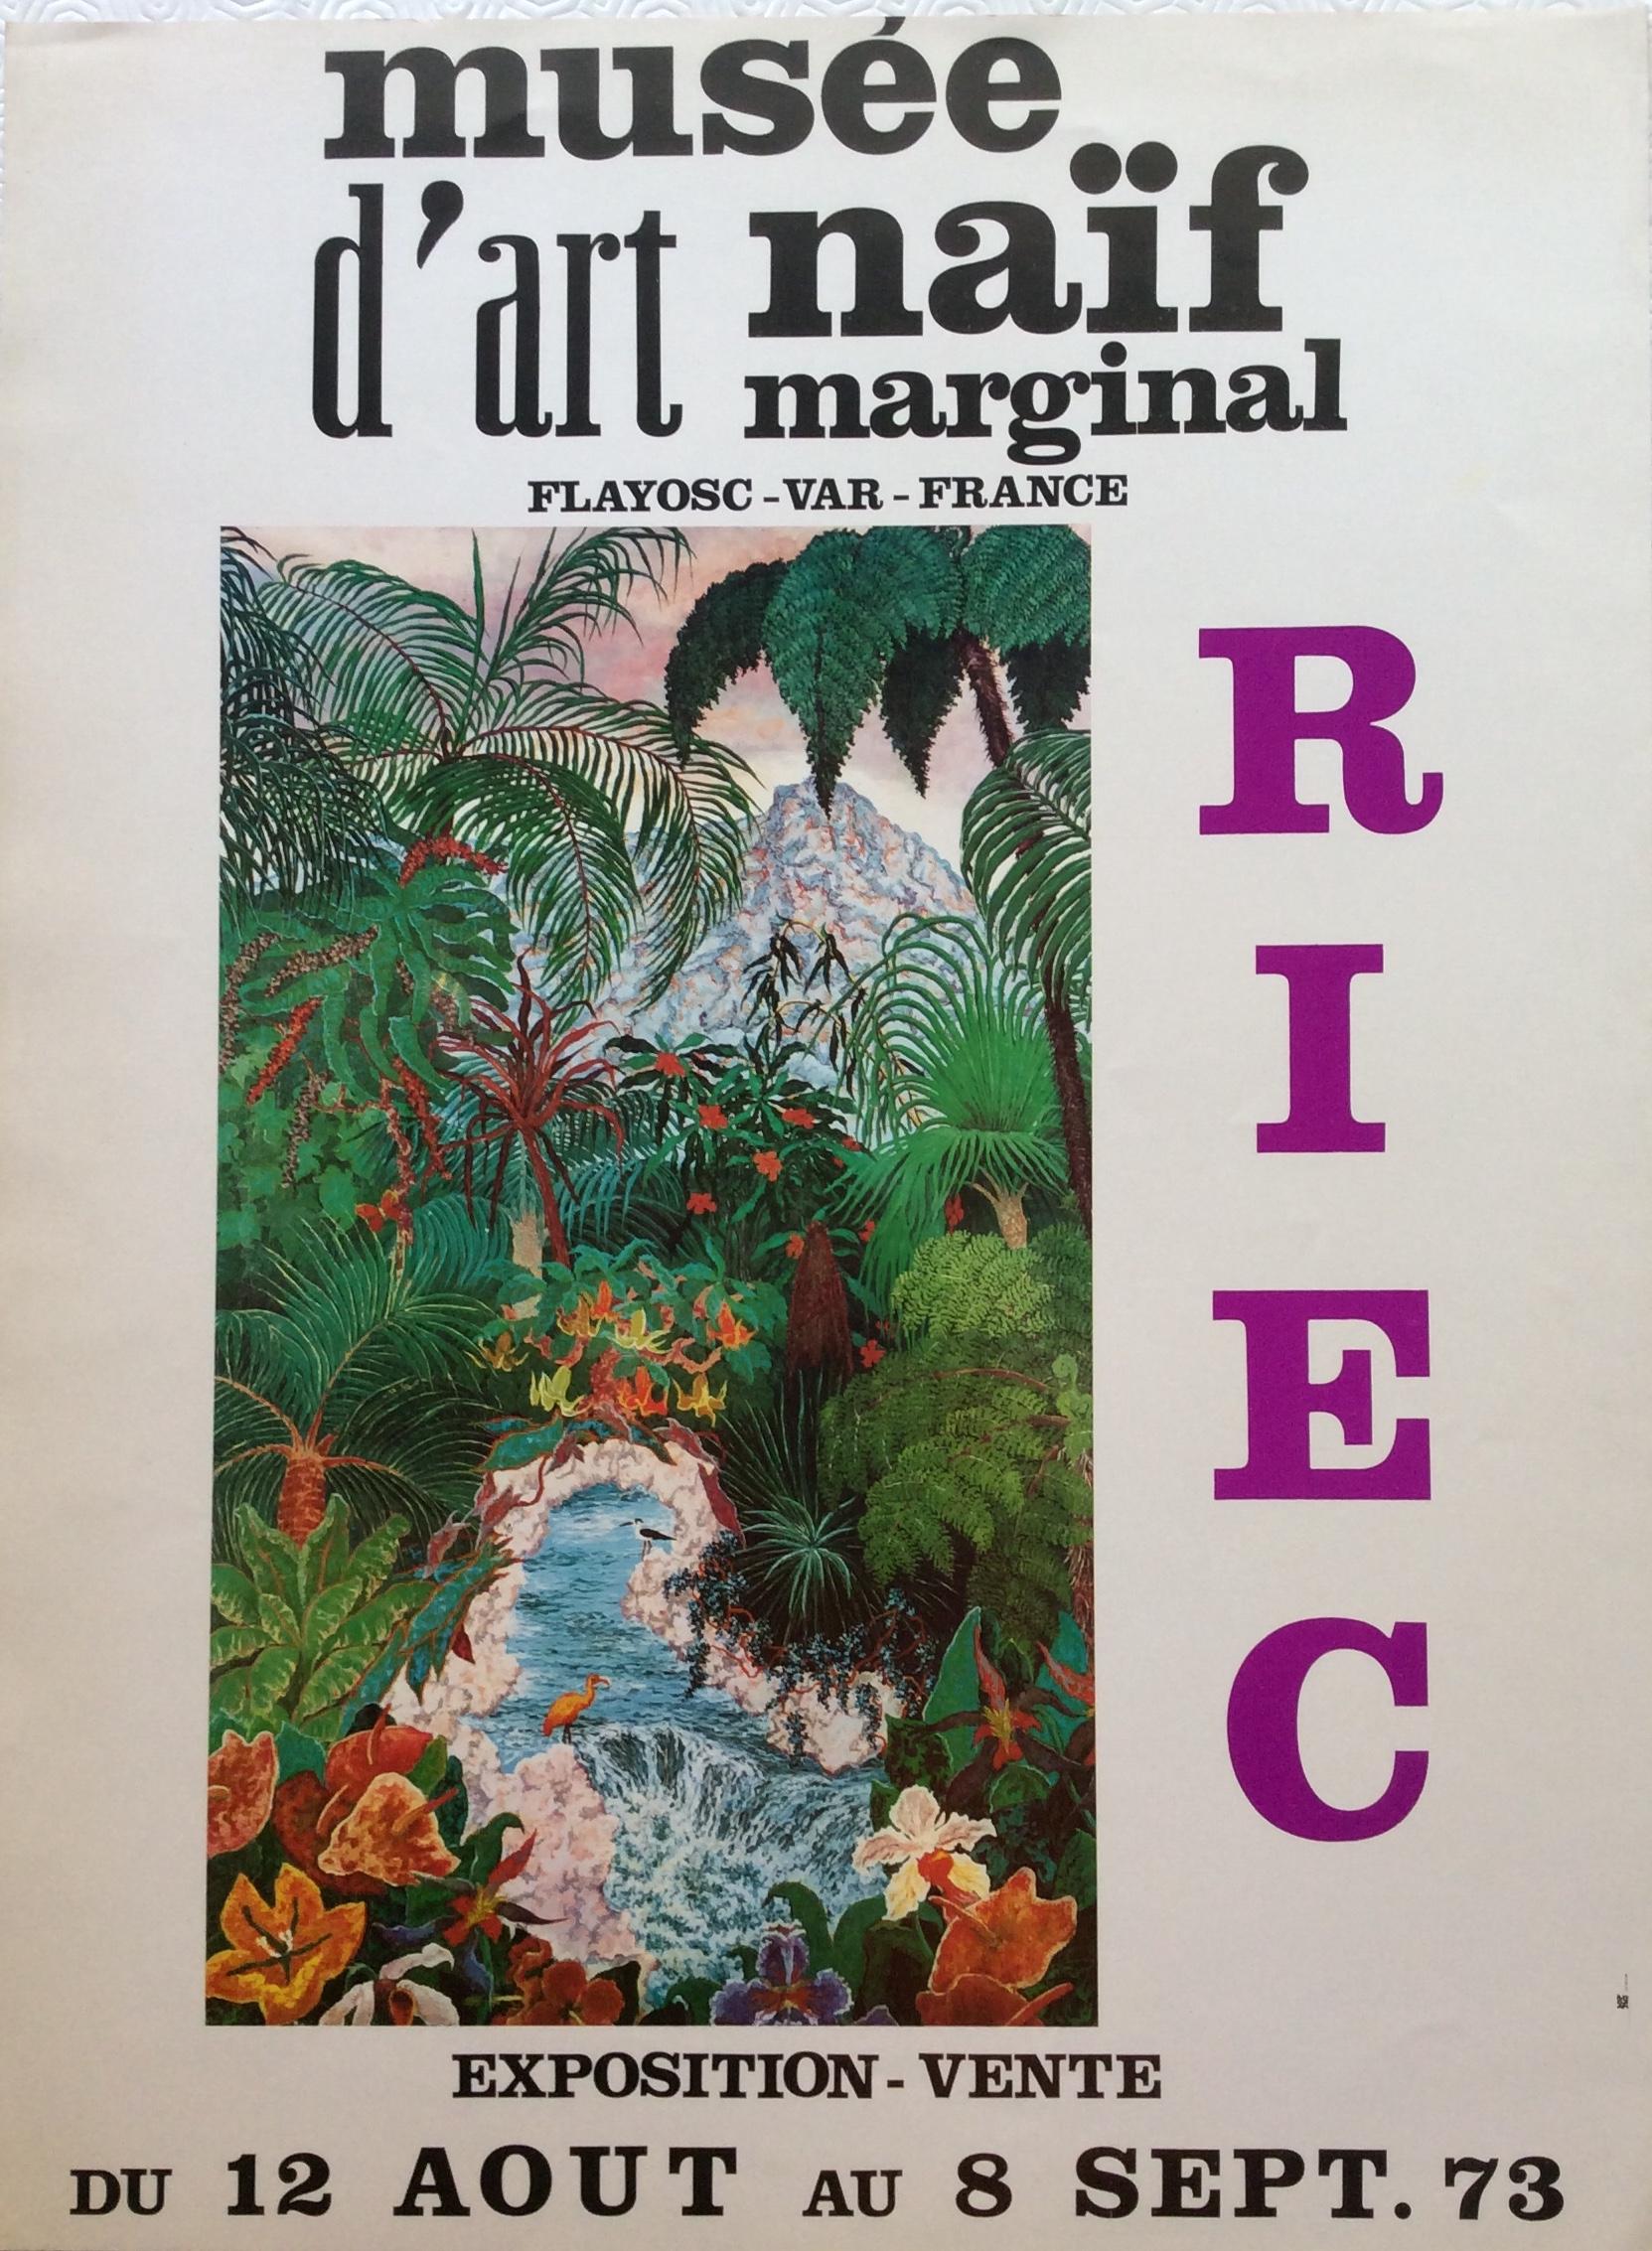 Mid-Century Modern 1970s Landscape Art Exhibition Poster from Musee d'Art Naif Marginal